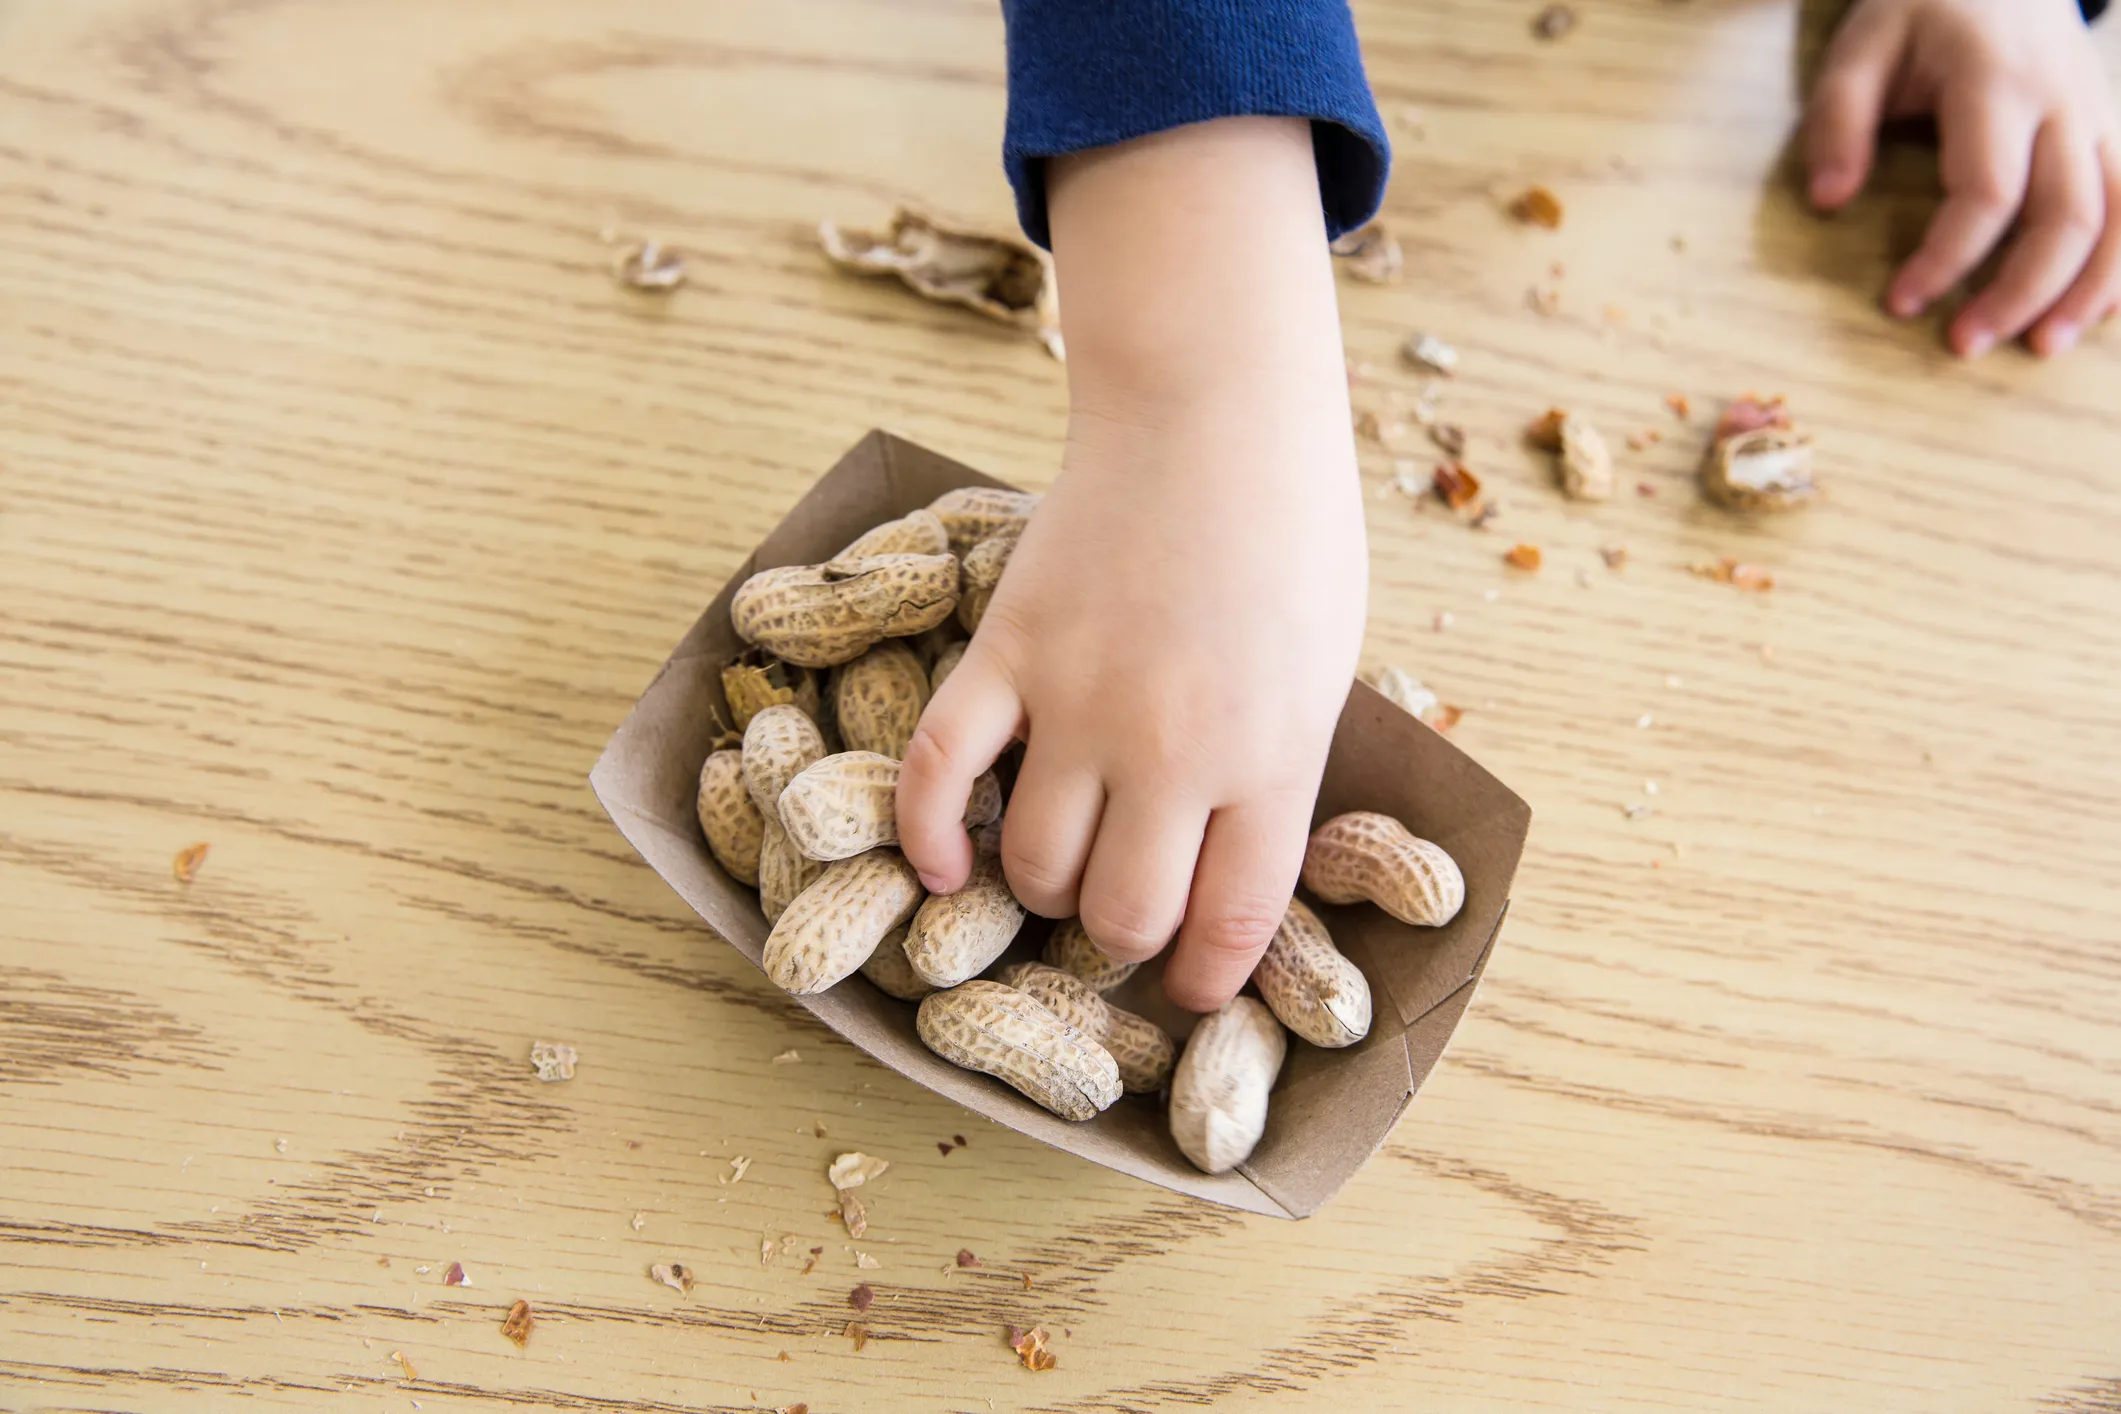 Feeding peanuts to young children can reduce allergy risk: Study